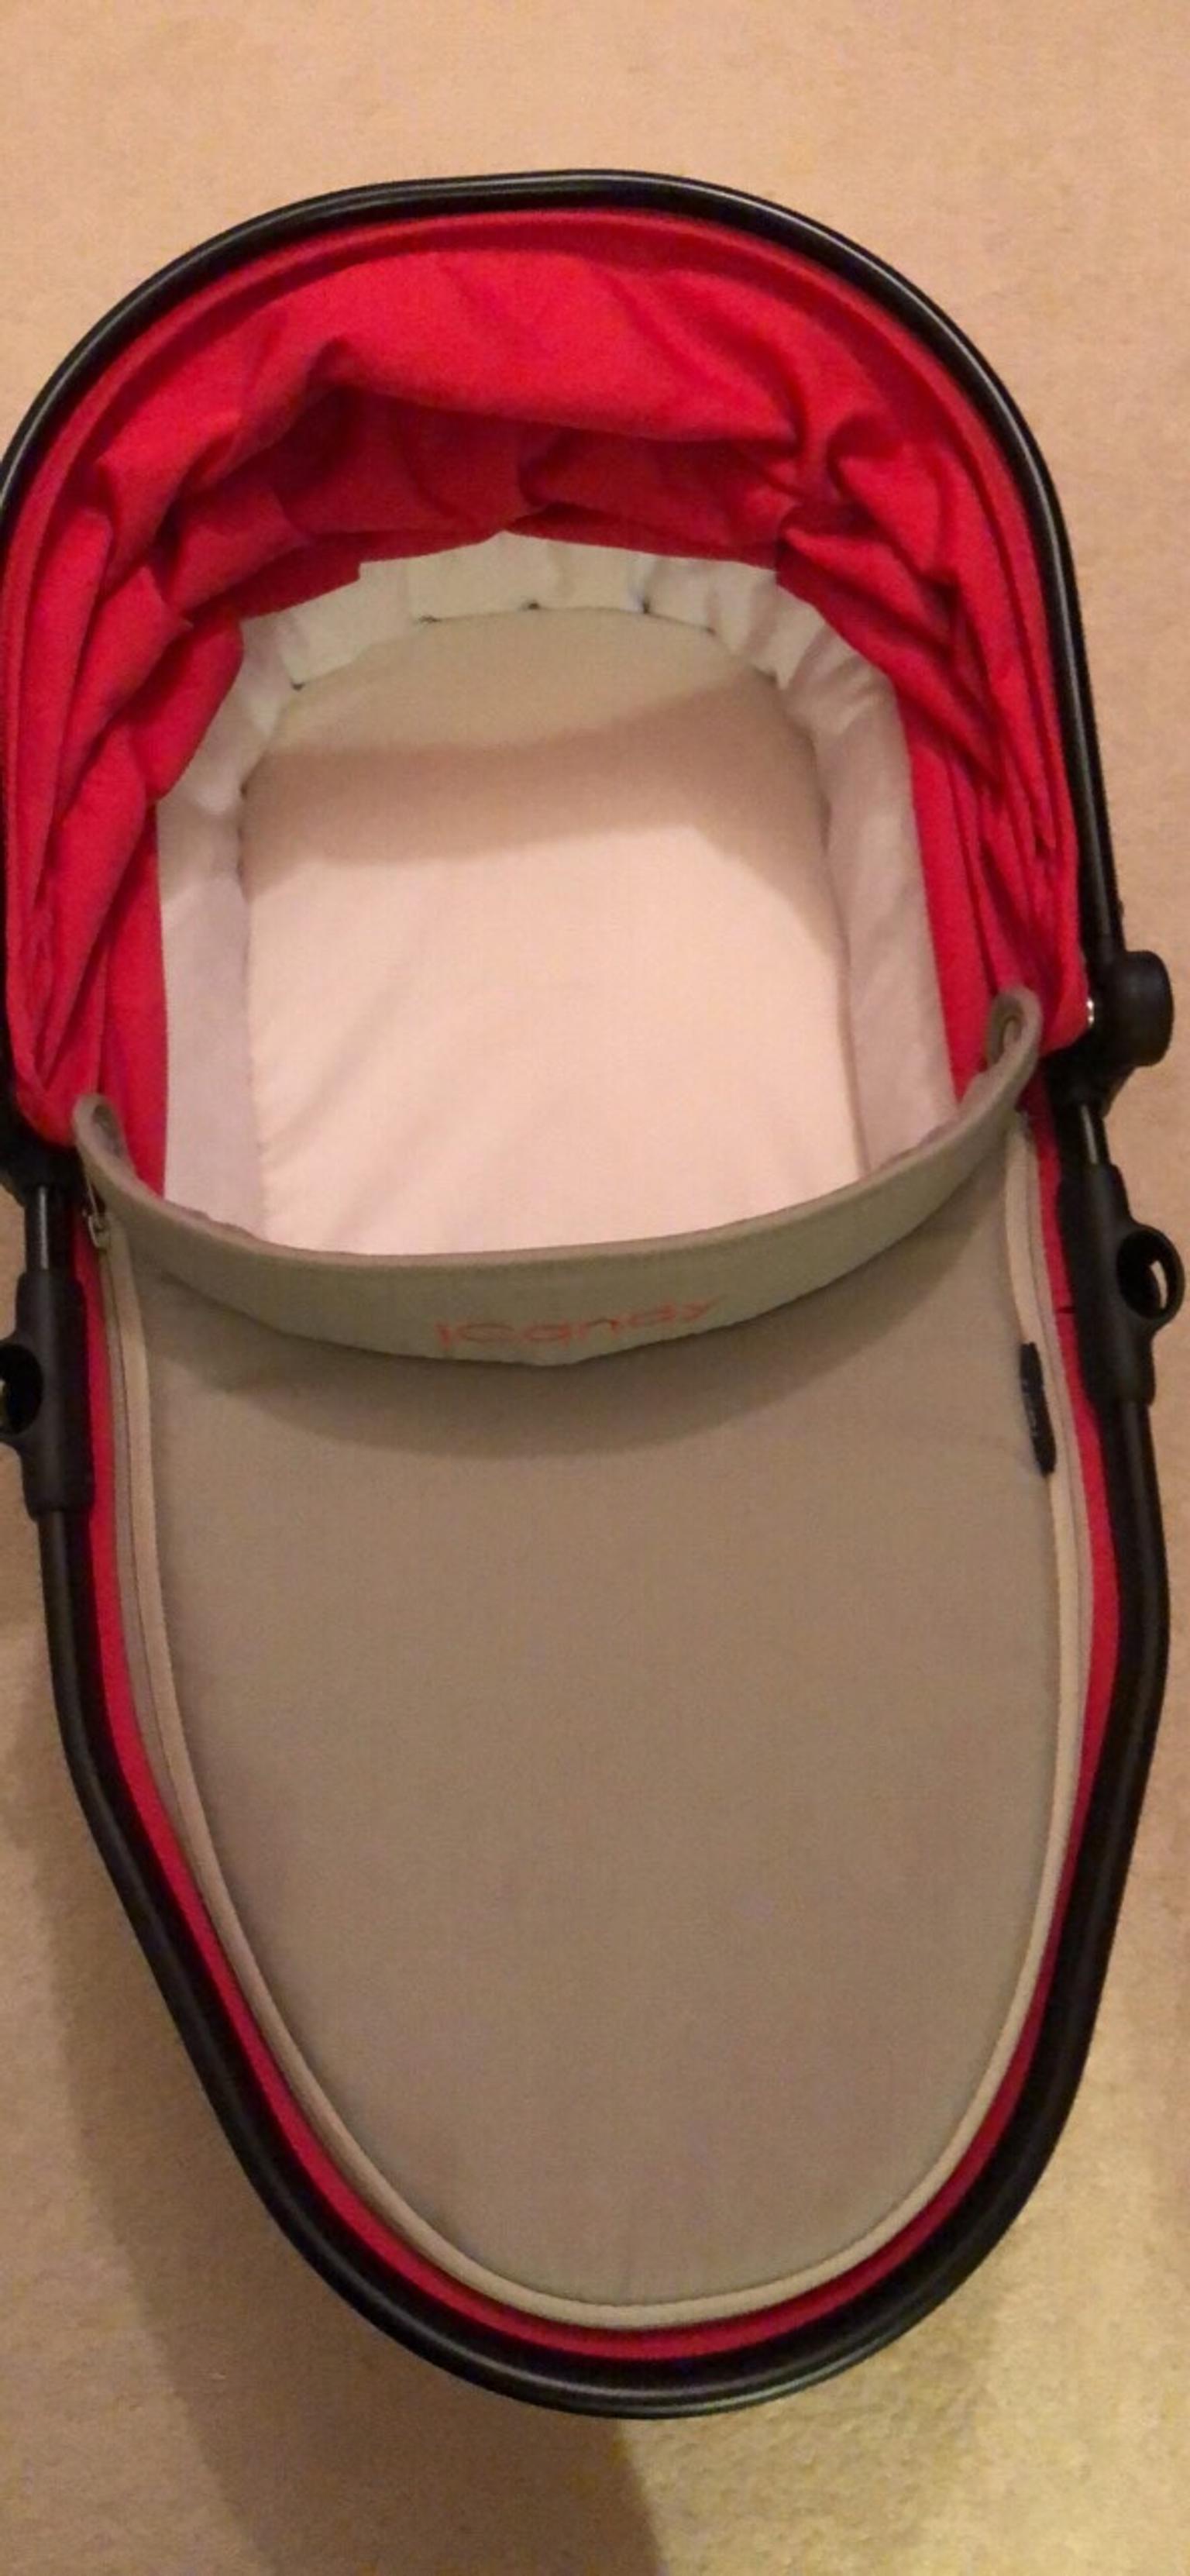 icandy peach 3 blossom carrycot